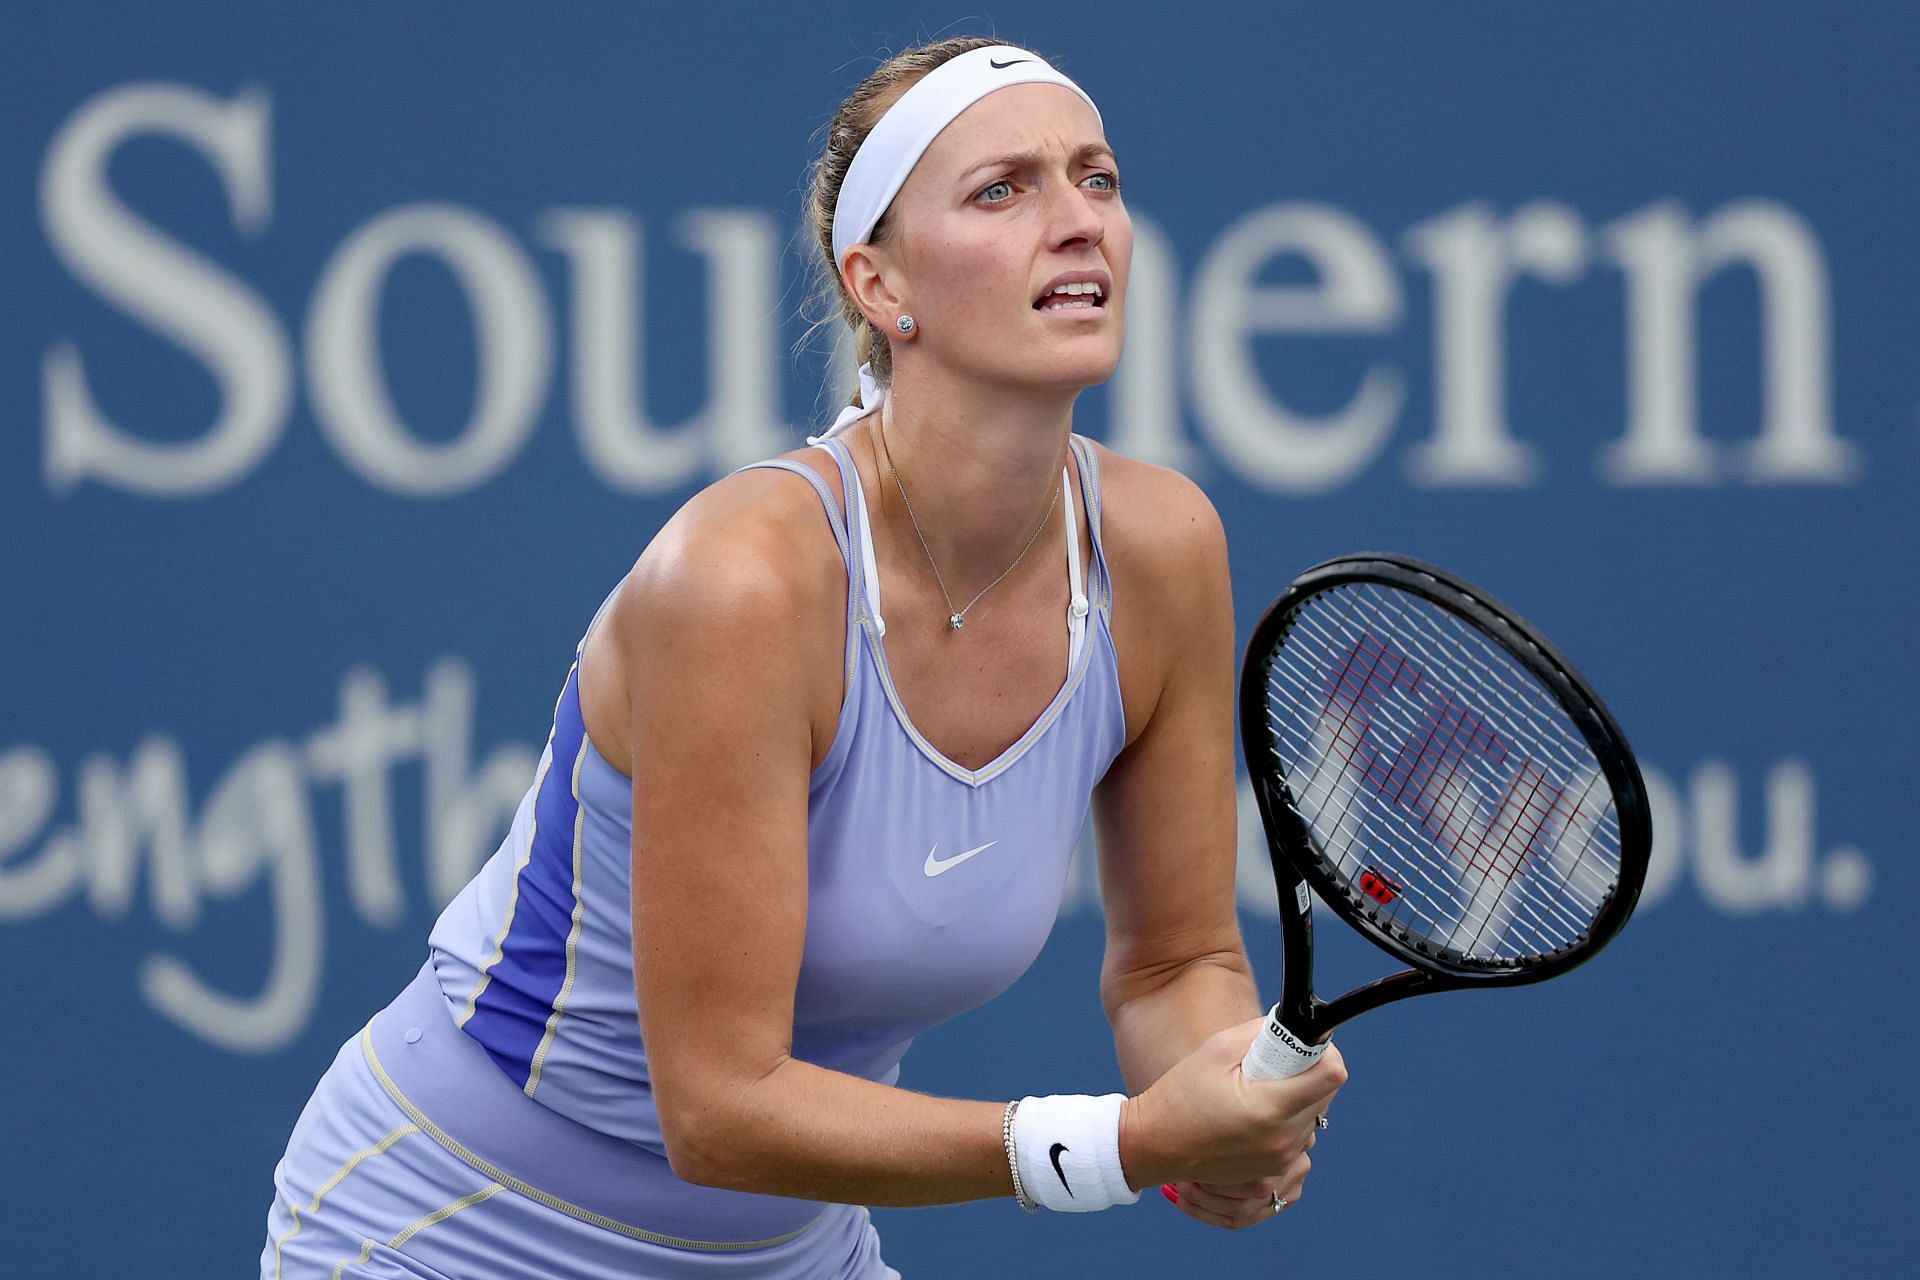 Kvitova&#039;s serve and forehand have been massive weapons for her this week